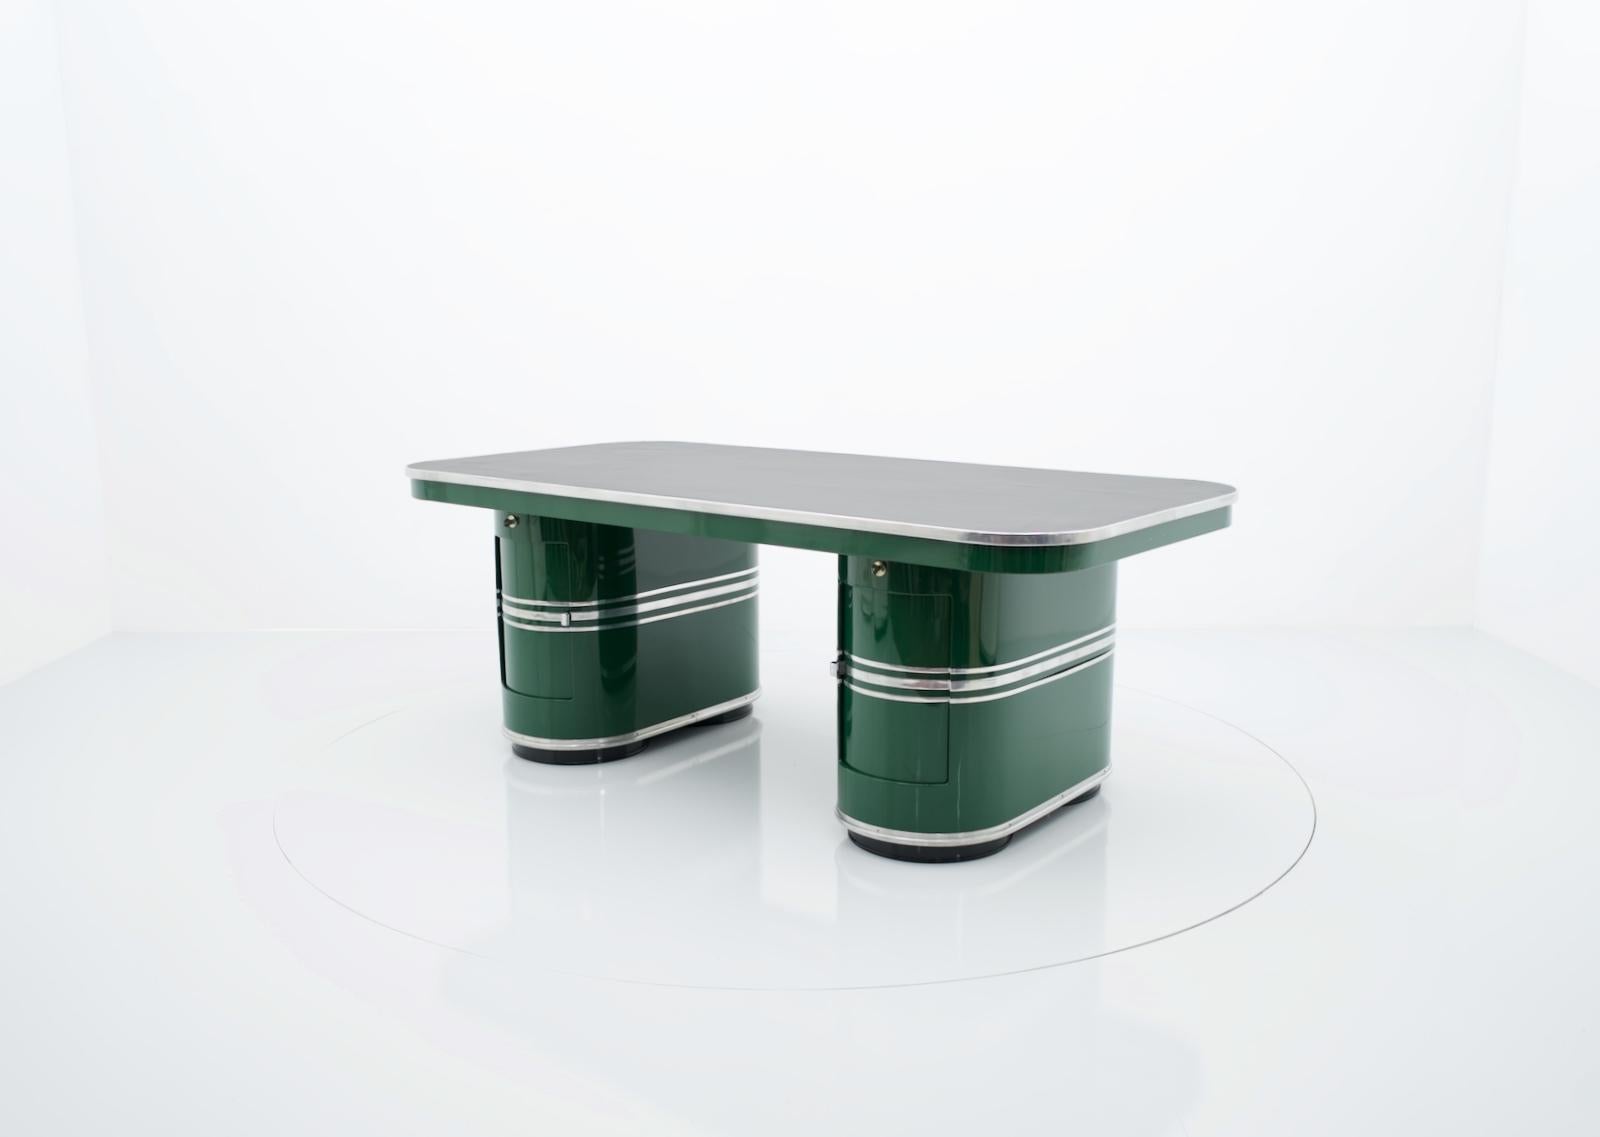 Mauser Rundform 'Berlin' Writing Desk in British Racing Green, Germany, 1950 For Sale 5